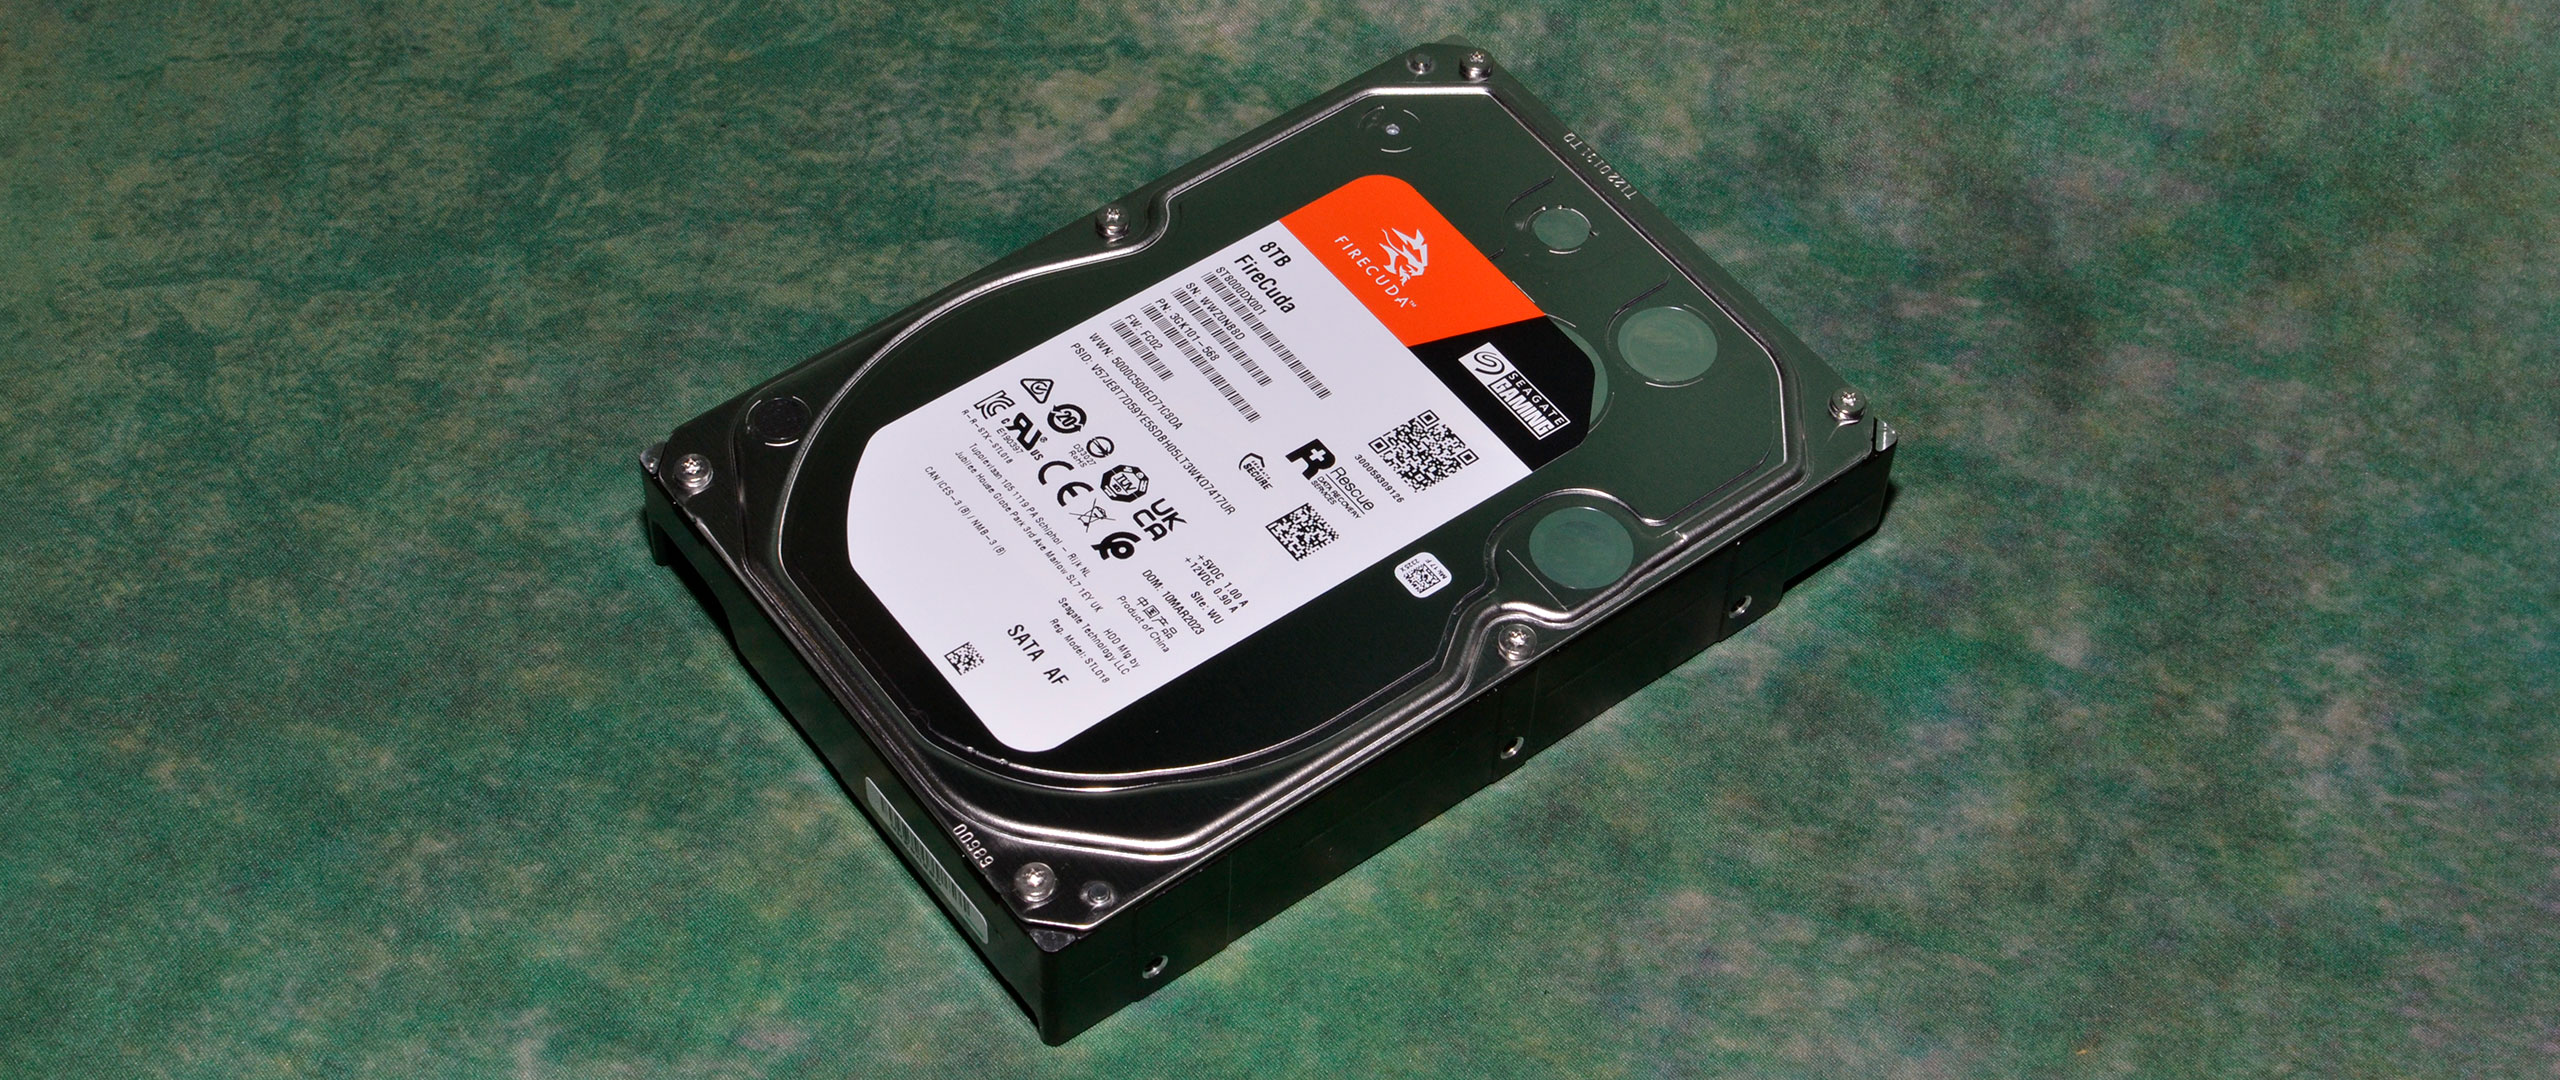 Seagate FireCuda 8TB HDD Review: A Solid Storage Solution